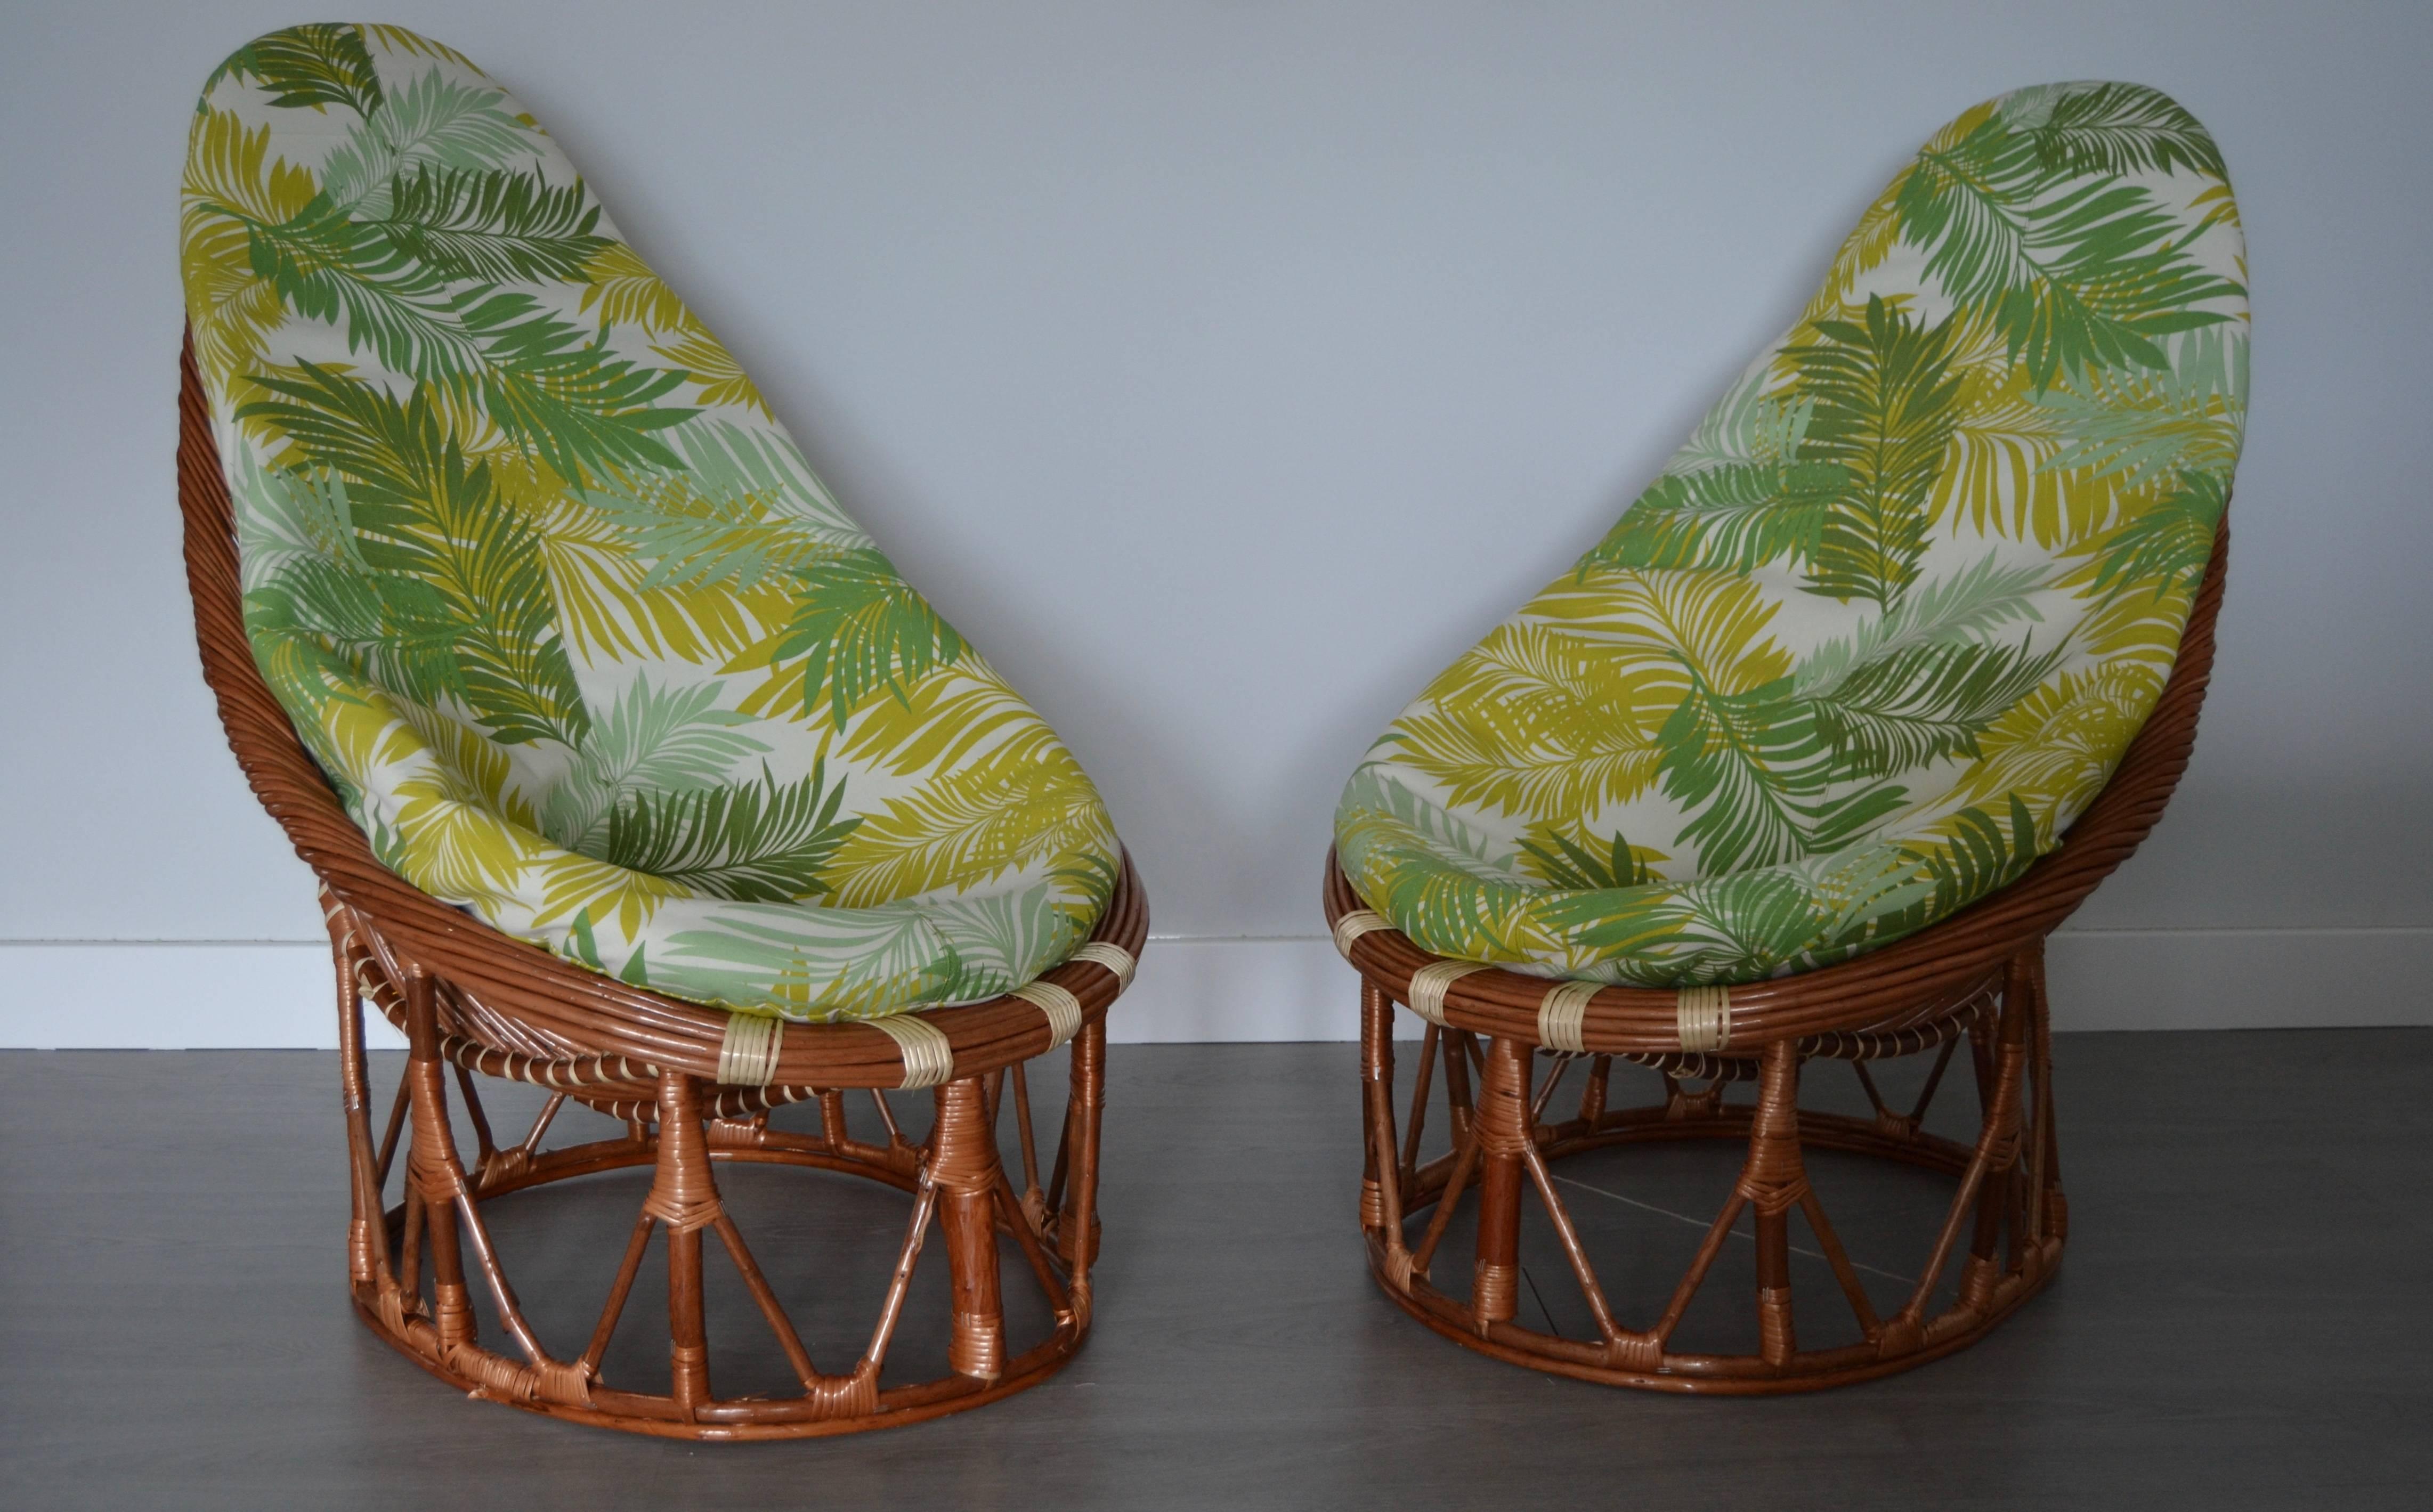 Pair of bambou and rattan handmade armchairs.
Great work entirely restored
Upholstered with cotton palm tree fabric
Ten pieces available.